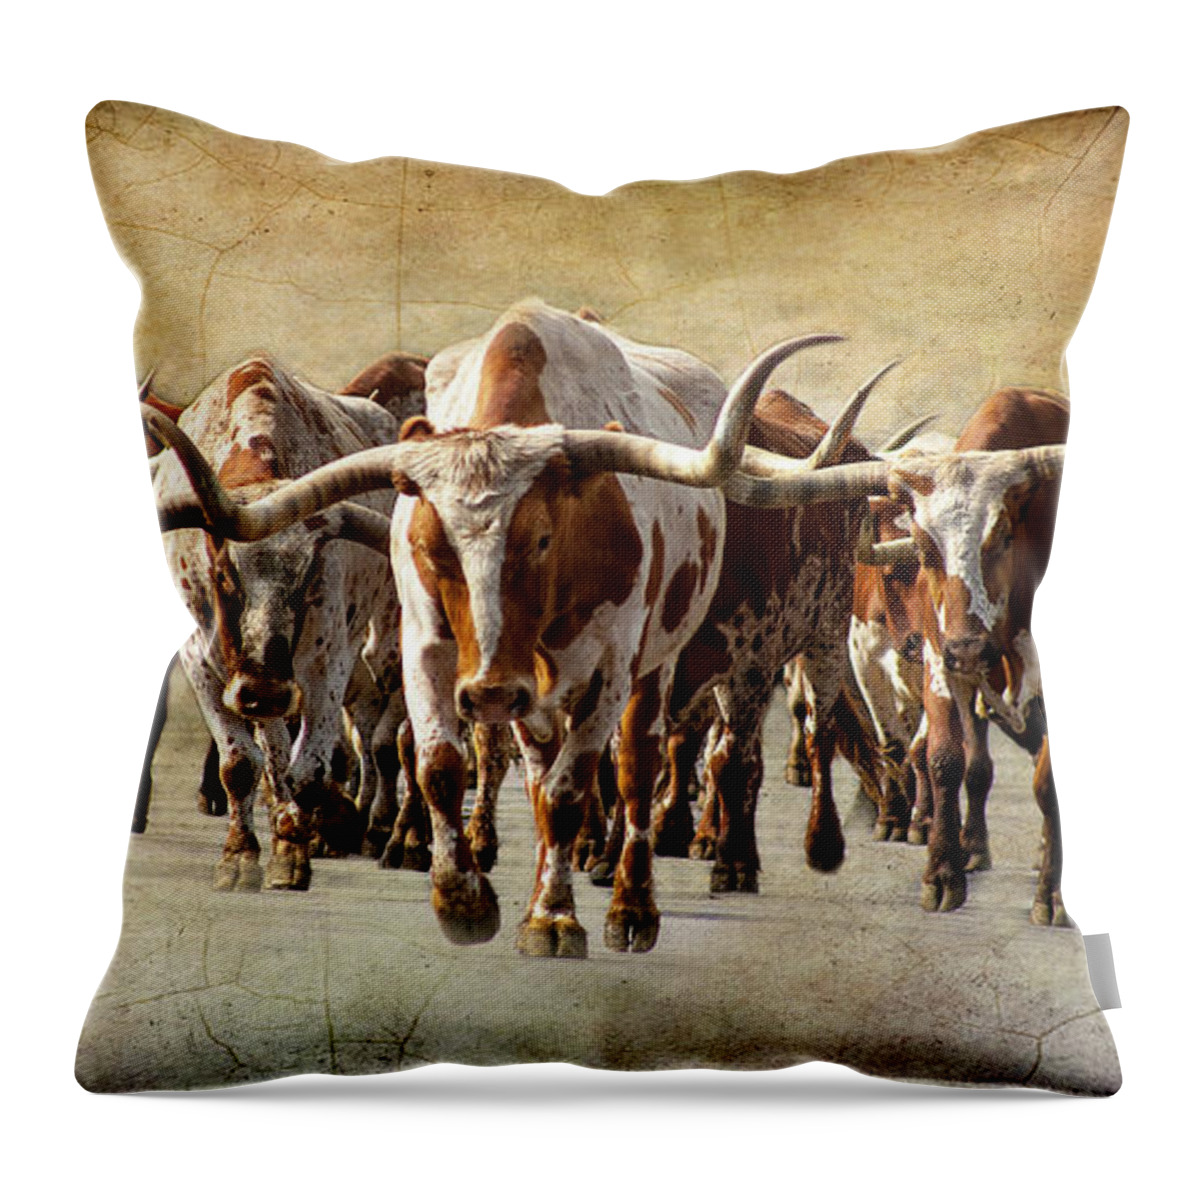 Cattle Throw Pillow featuring the photograph The Herd by Steven Reed